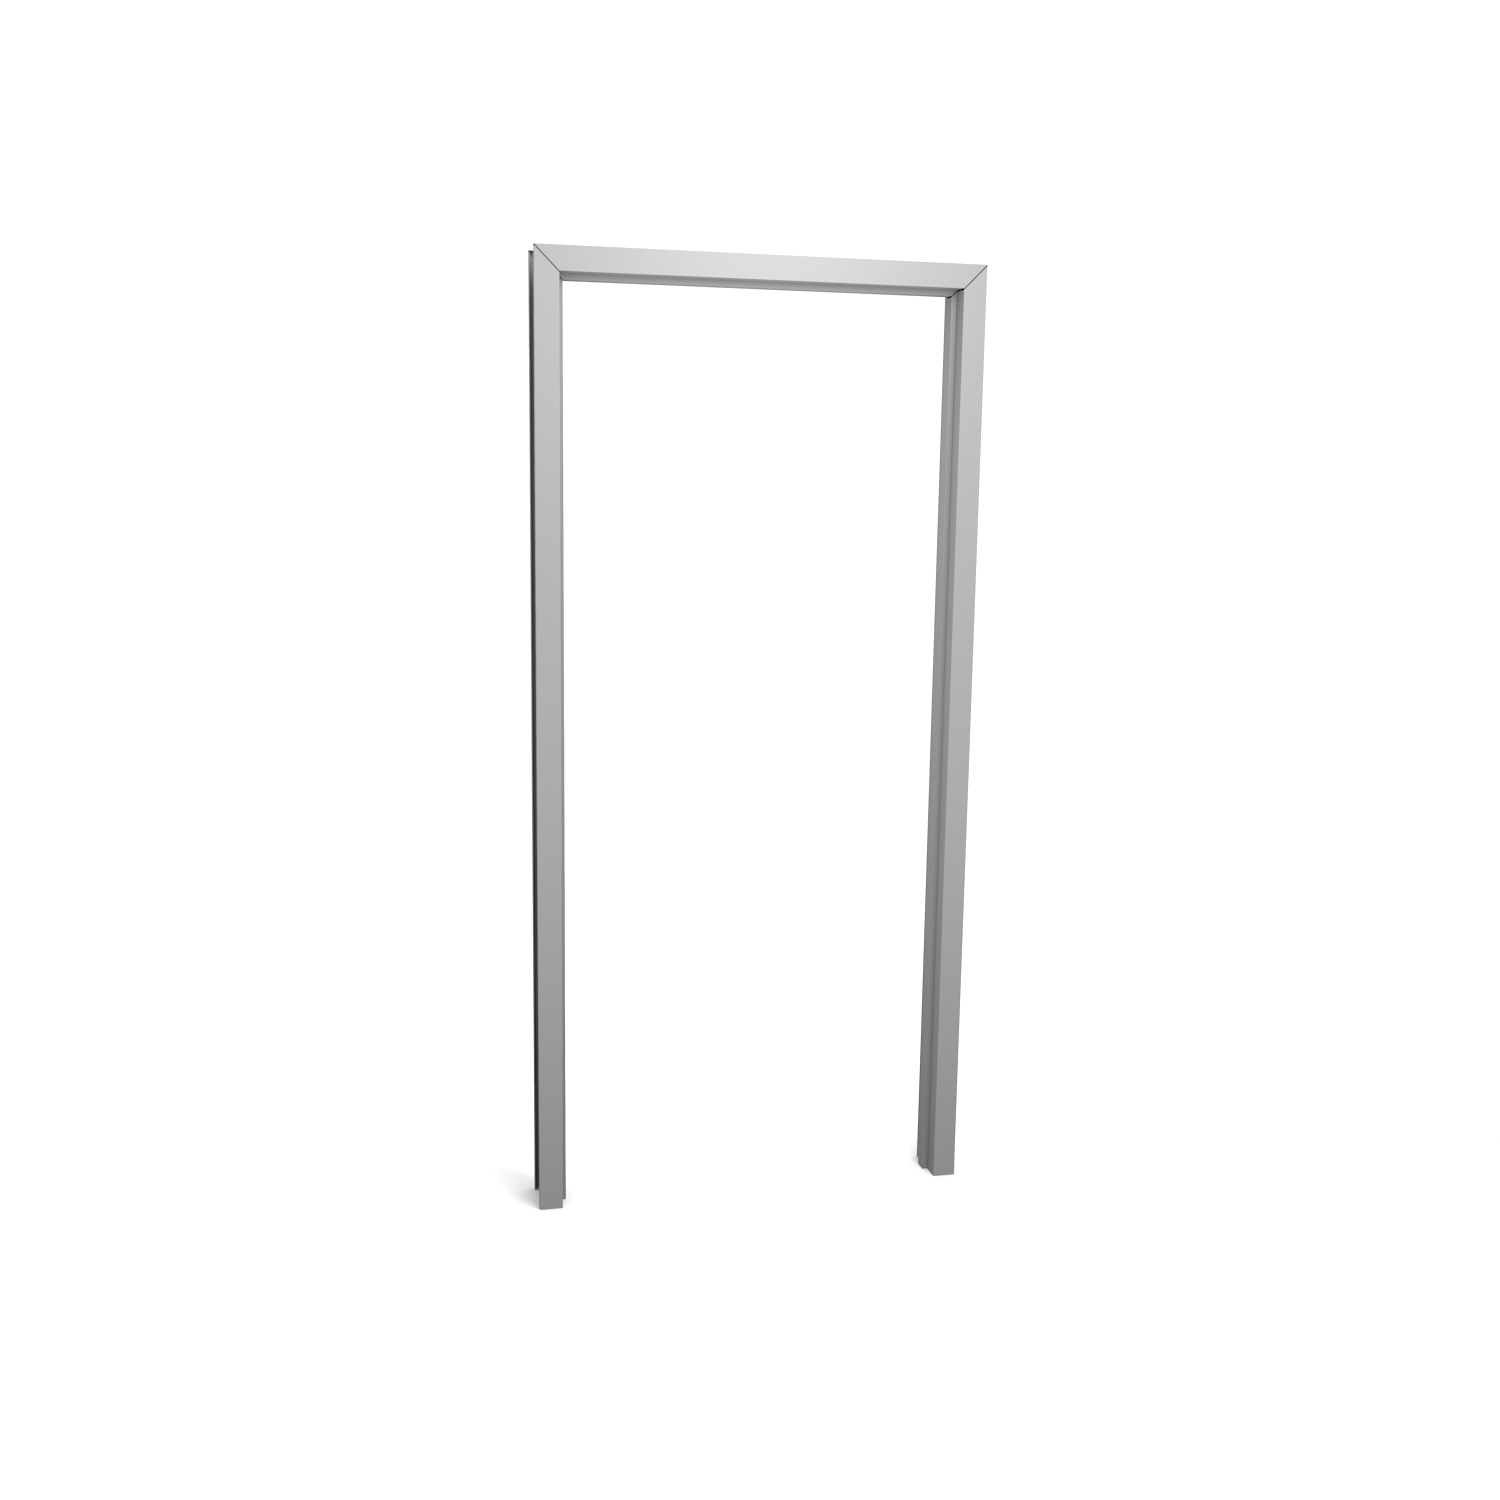 Republic ME Series 3'0 x 7'0 x 5 3/4" Commercial Hollow Metal Frame (For Masonry walls)